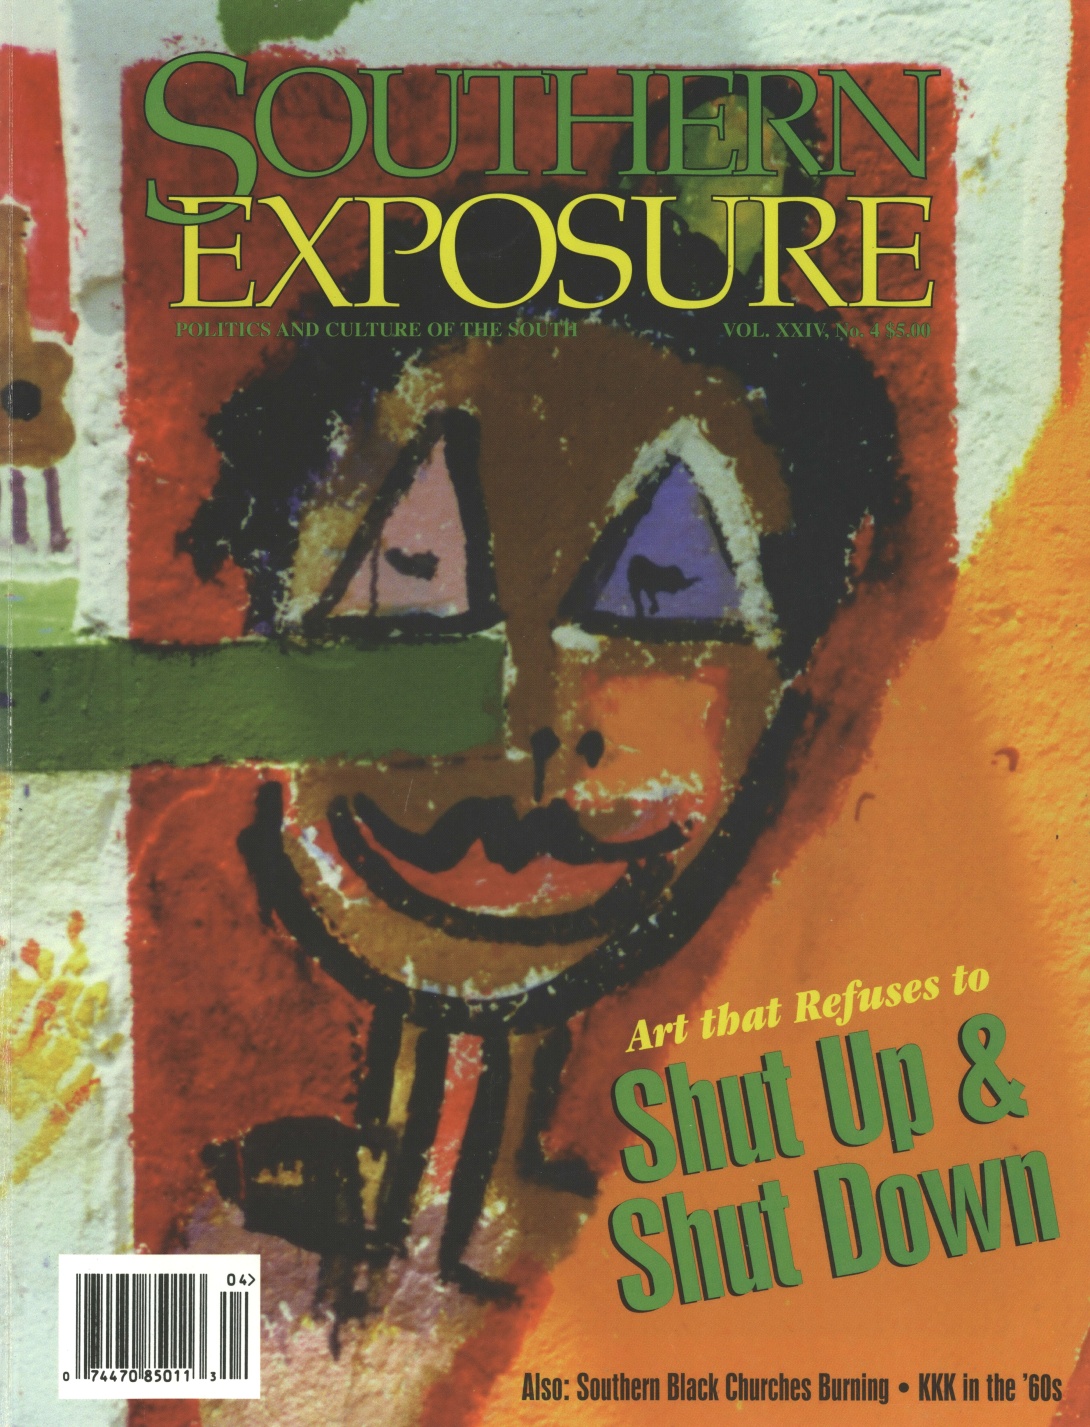 Magazine cover with painting as background, text reads "Art that refuses to shut up & shut down"